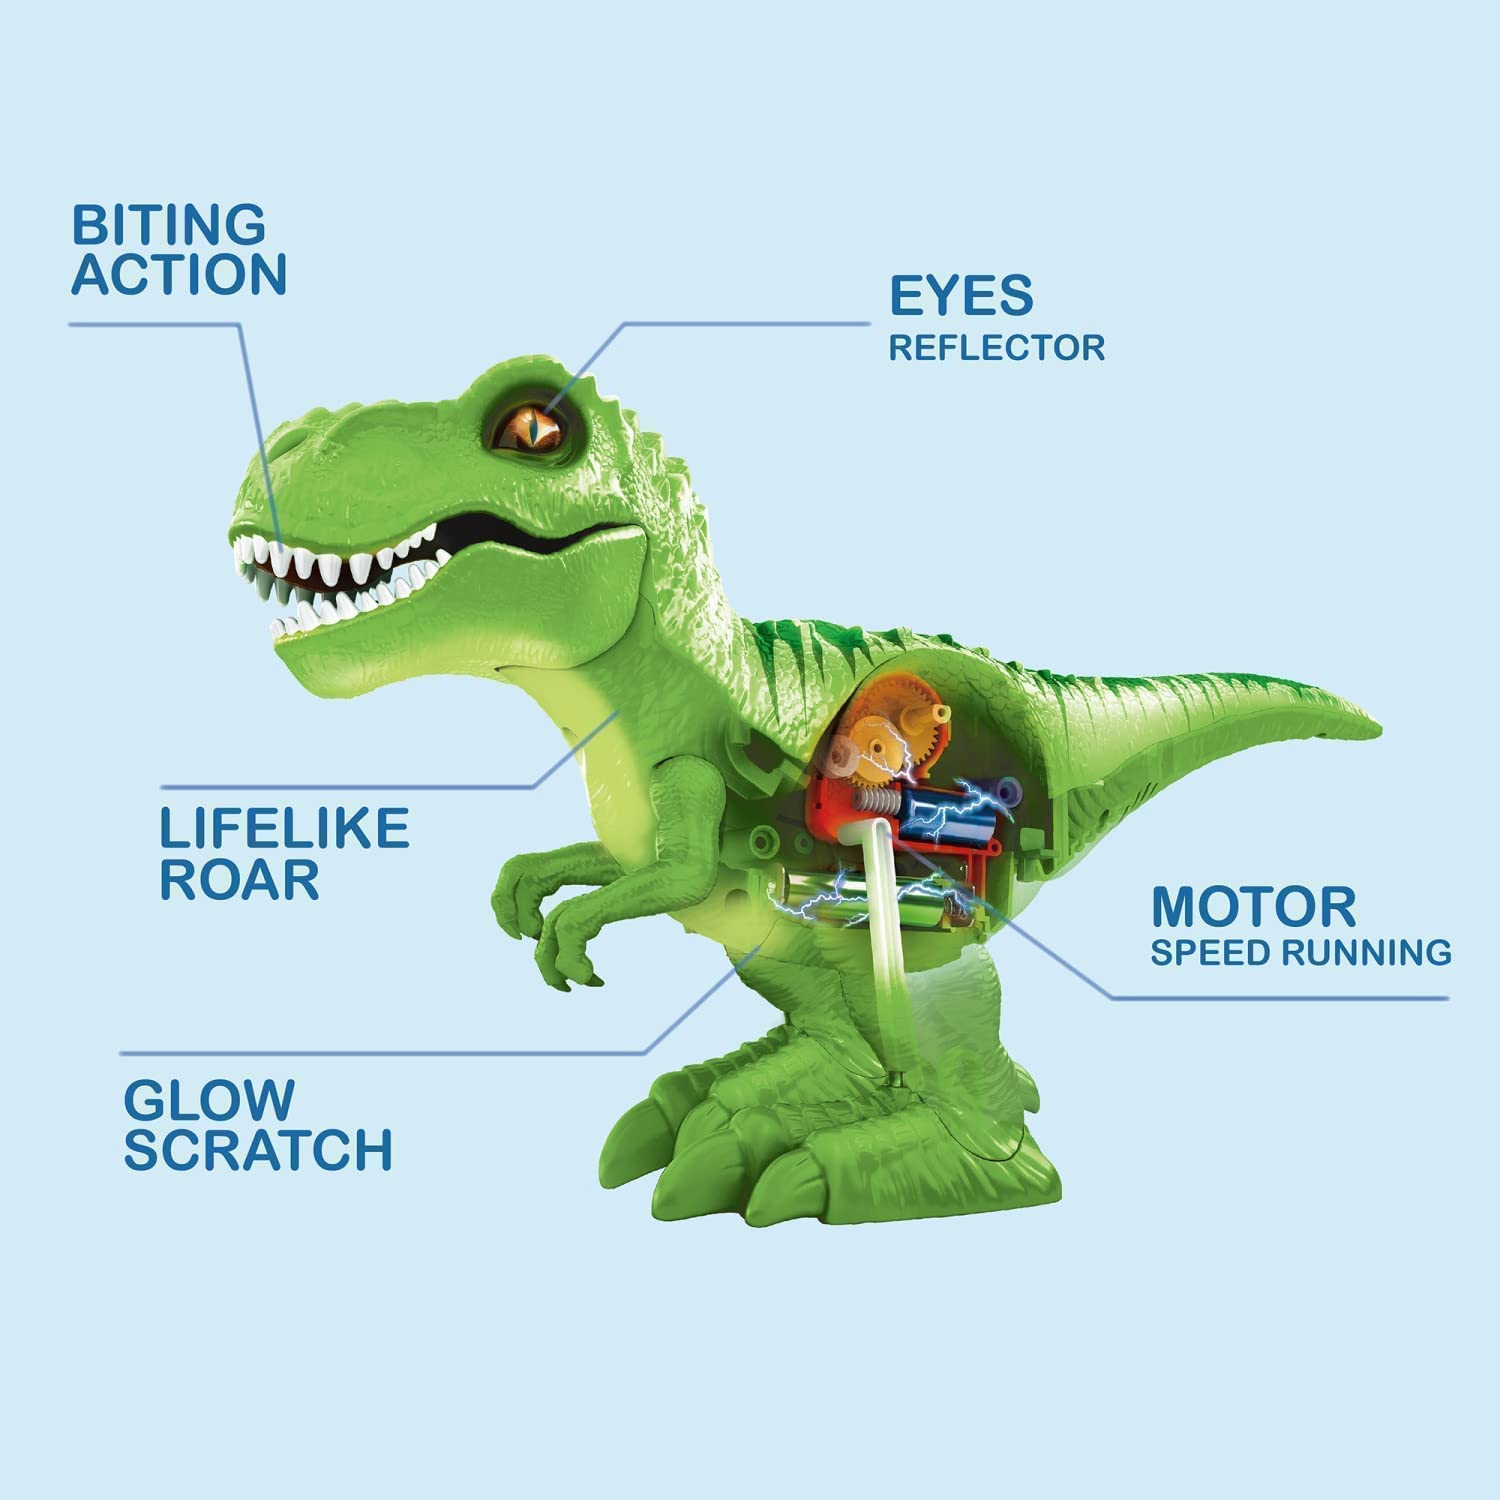 Robo Alive Attacking Green T-Rex Battery-Powered Robotic Toy by Zuru, Dinosaur Toy, Birthday Gift for Boys 3 Years Old and Up